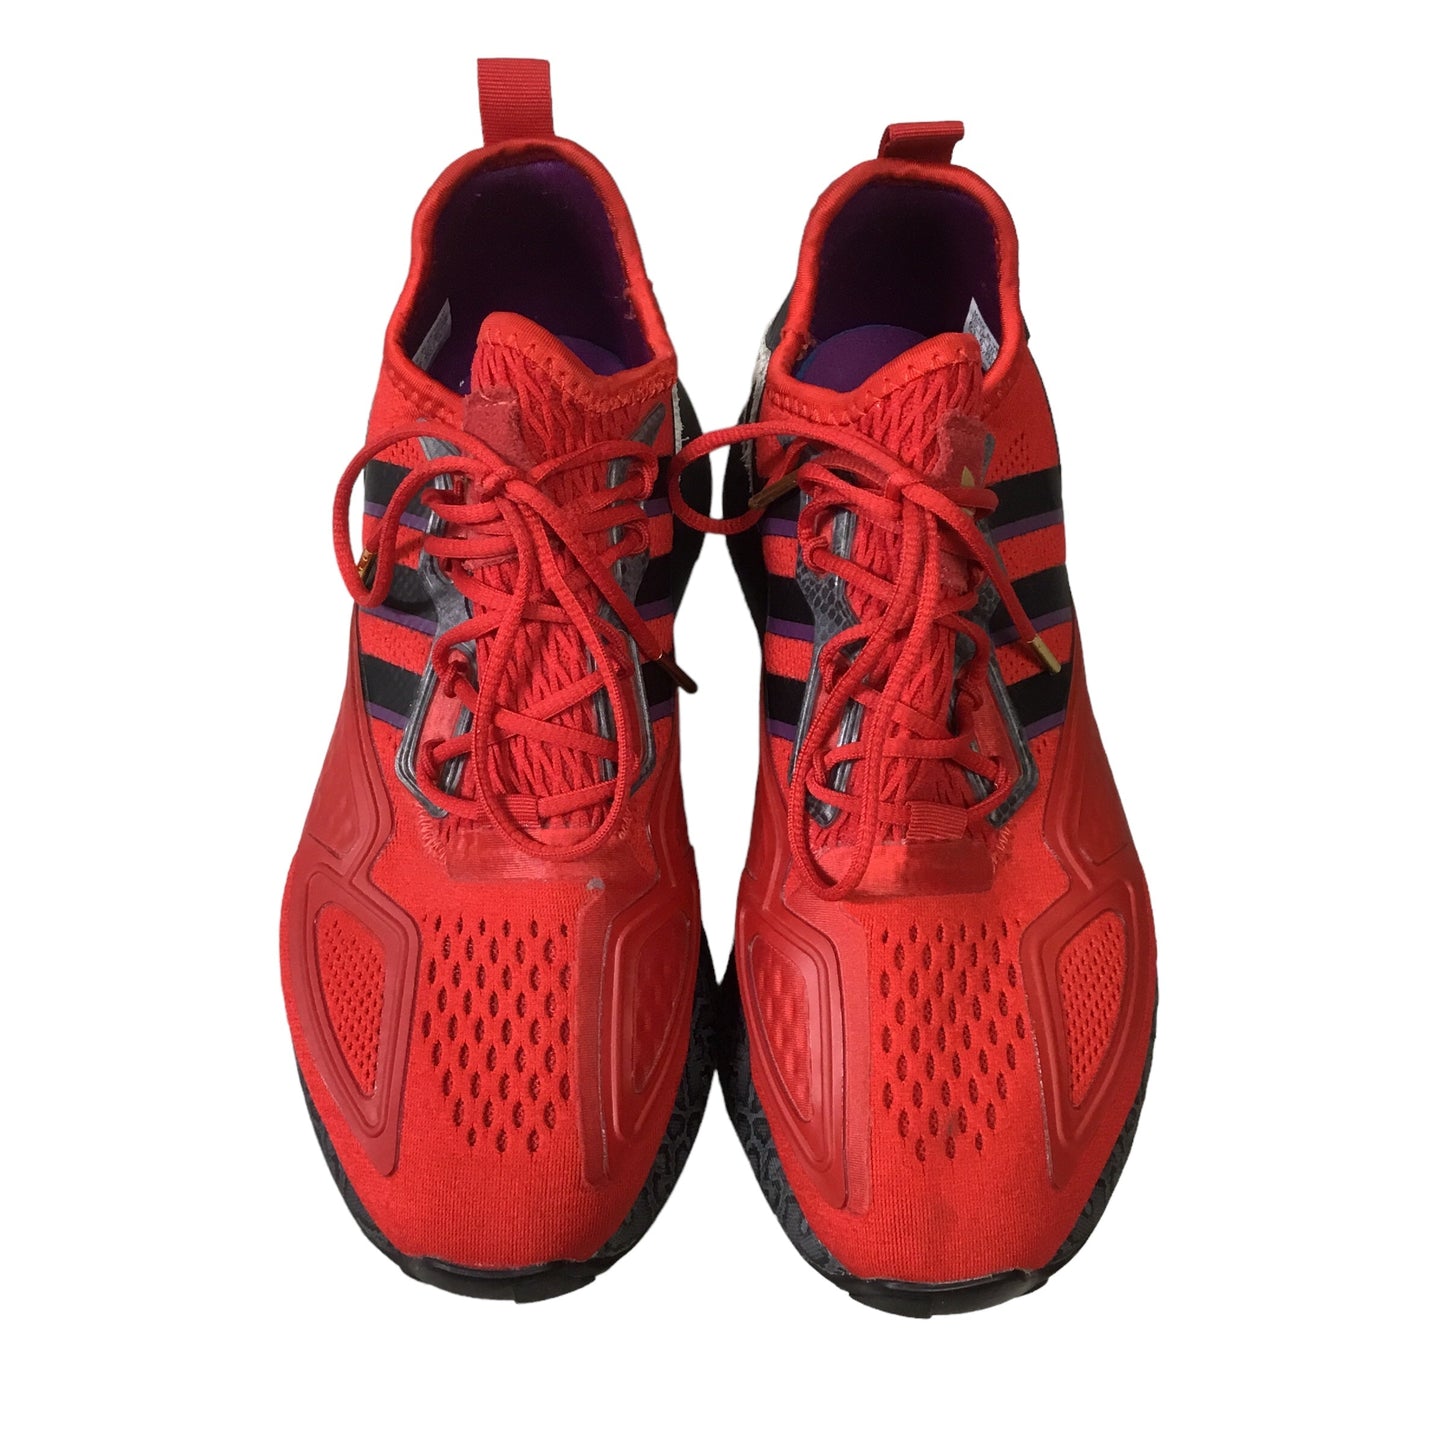 Red Shoes Athletic Adidas, Size 8